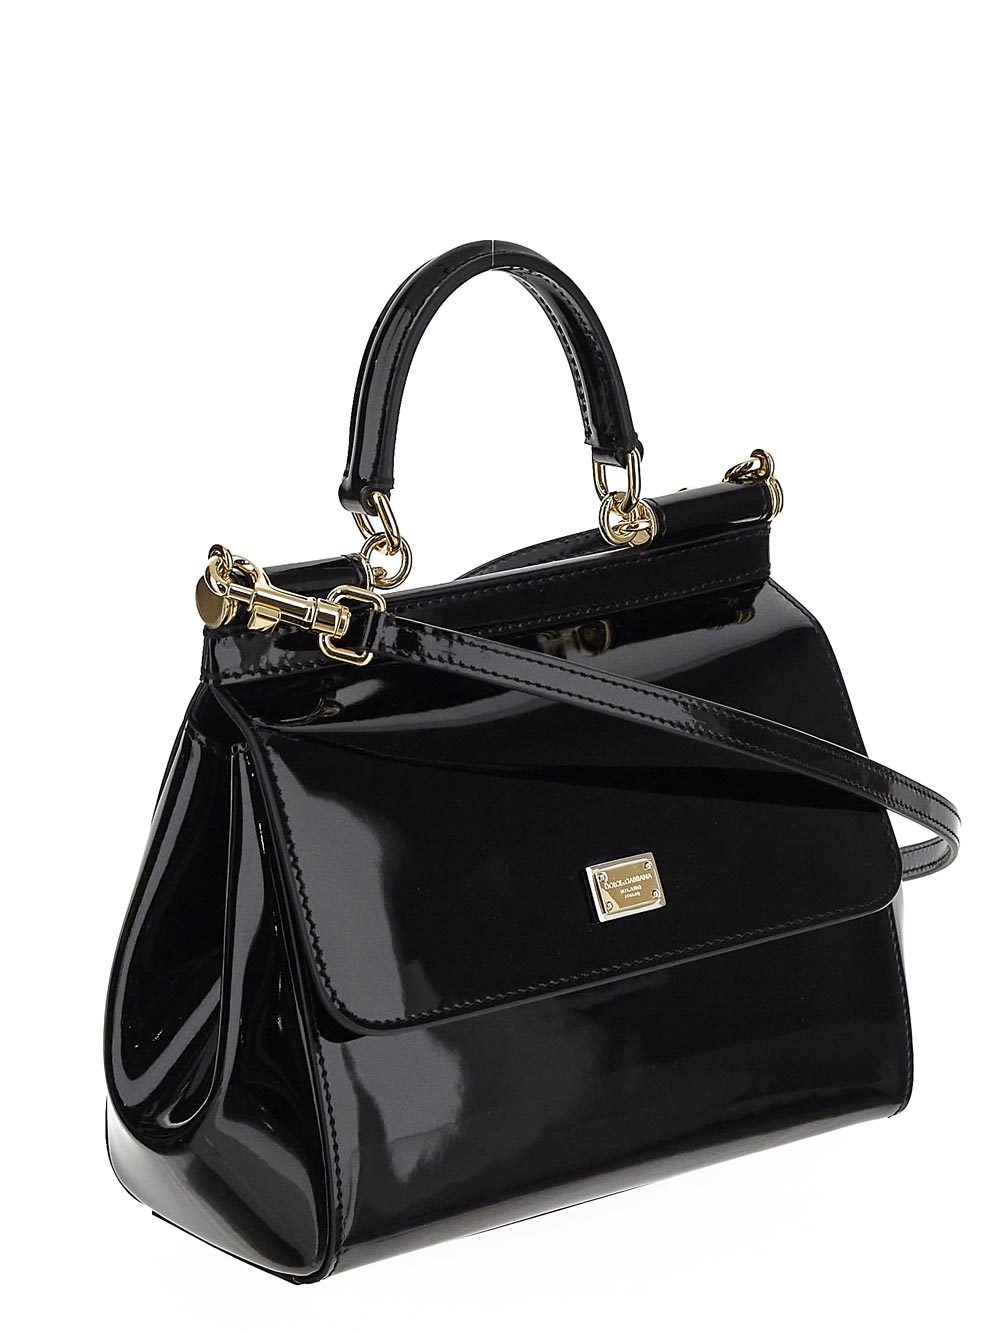 Dolce & Gabbana Small Dauphine Leather Sicily Bag